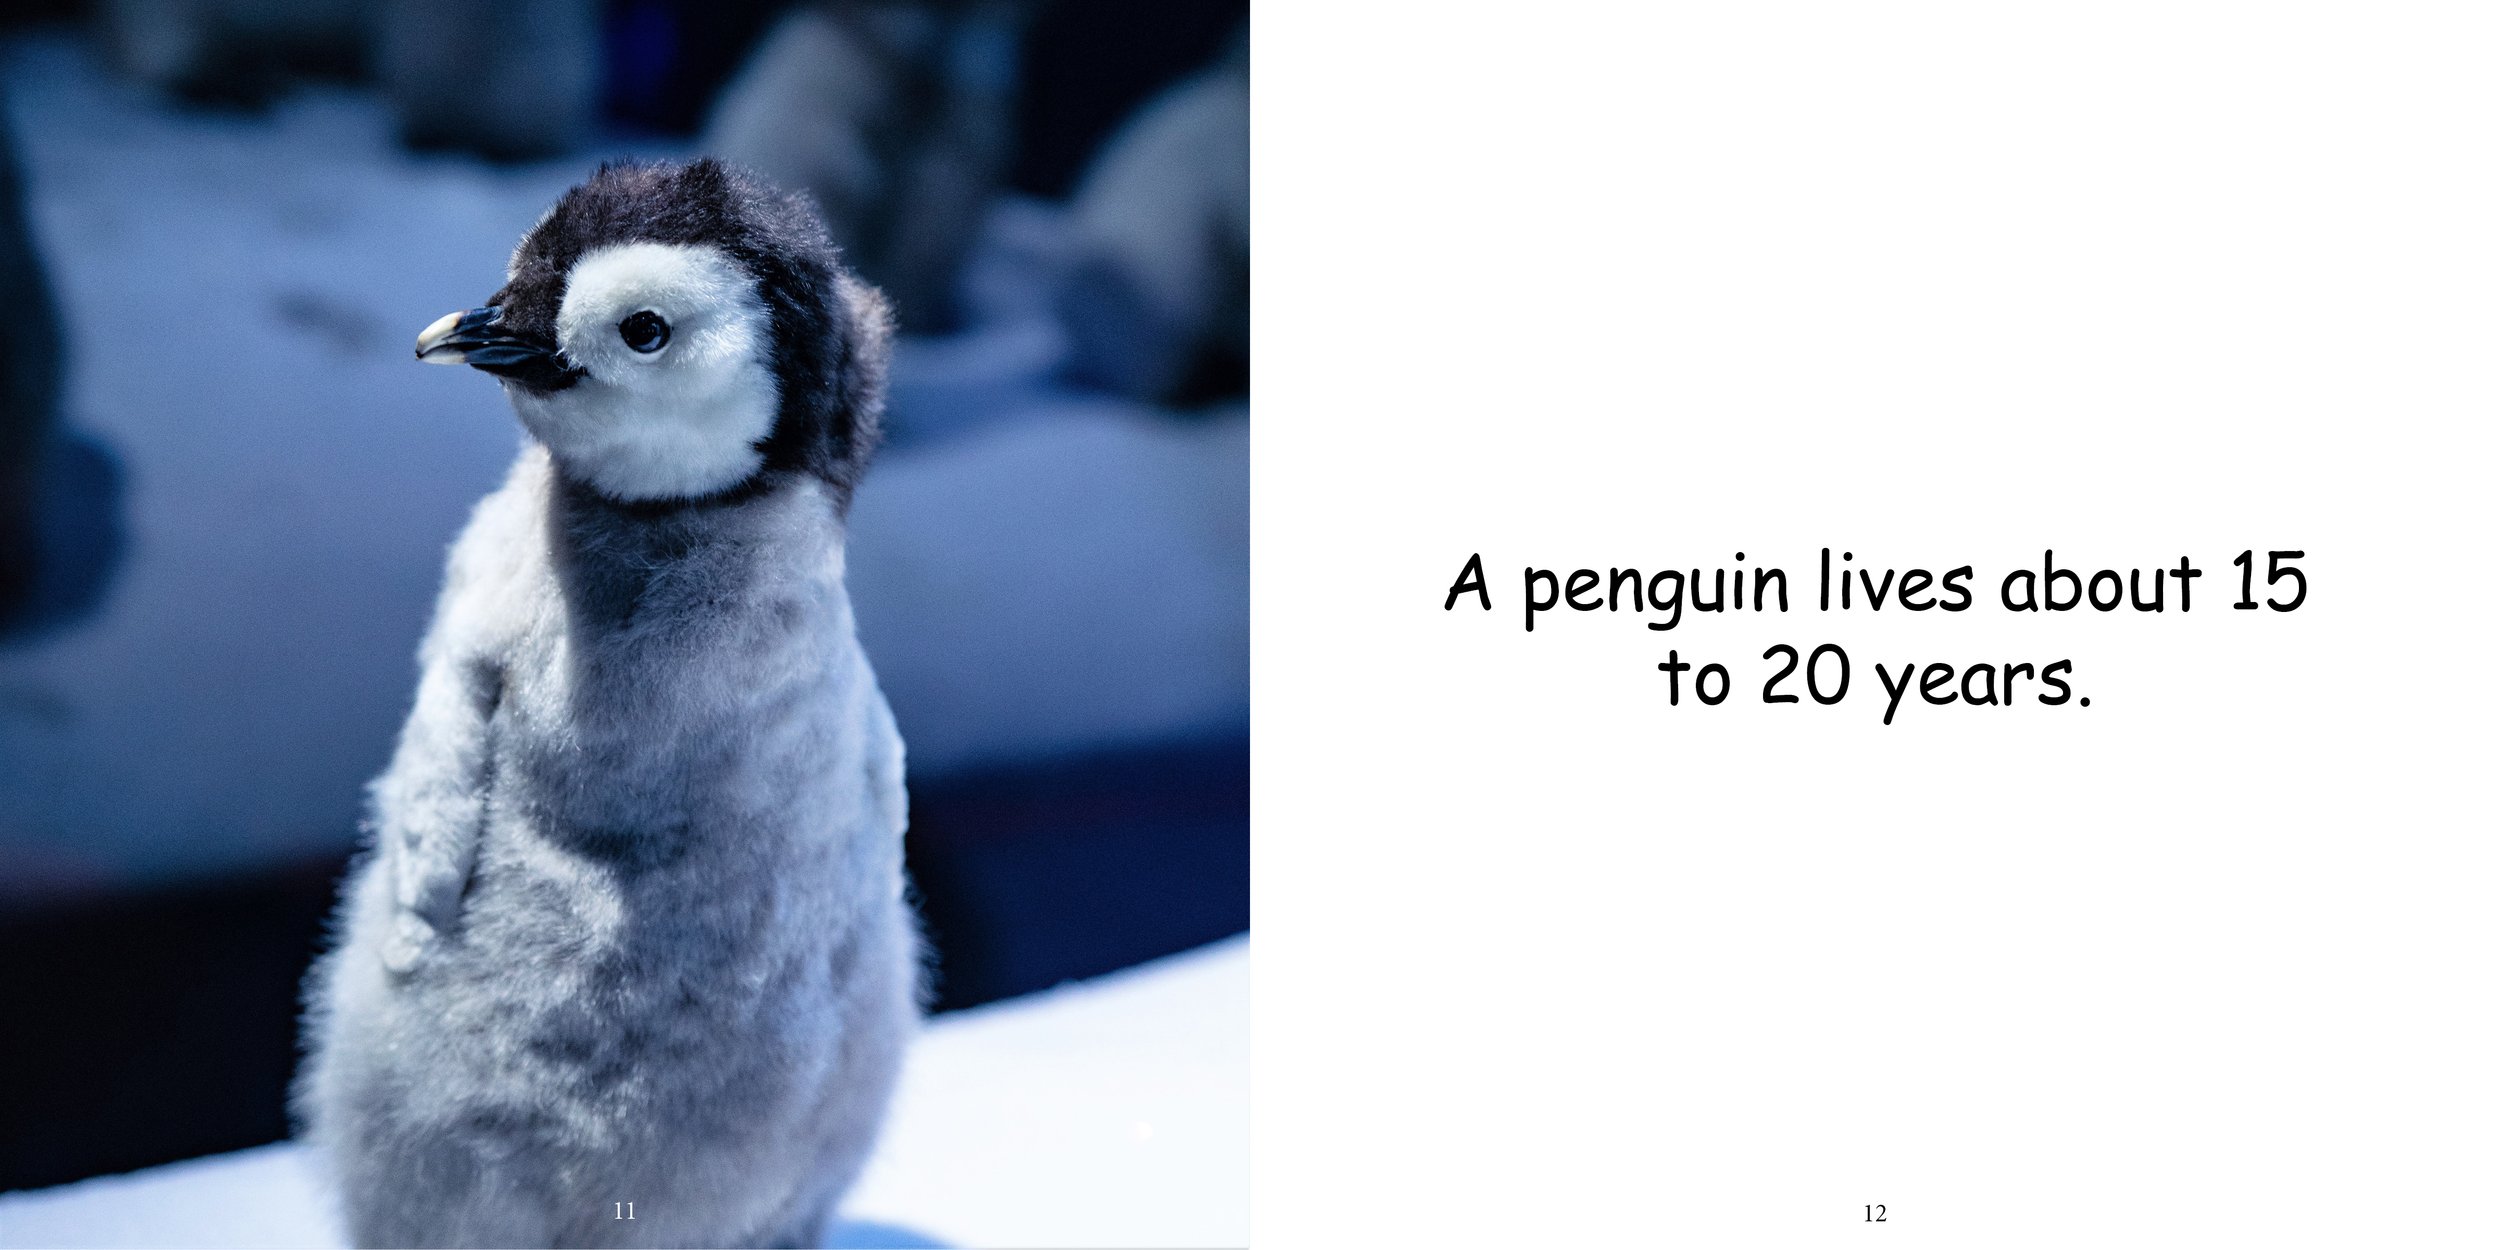 Everything about Penguins - Animal Series11.jpg